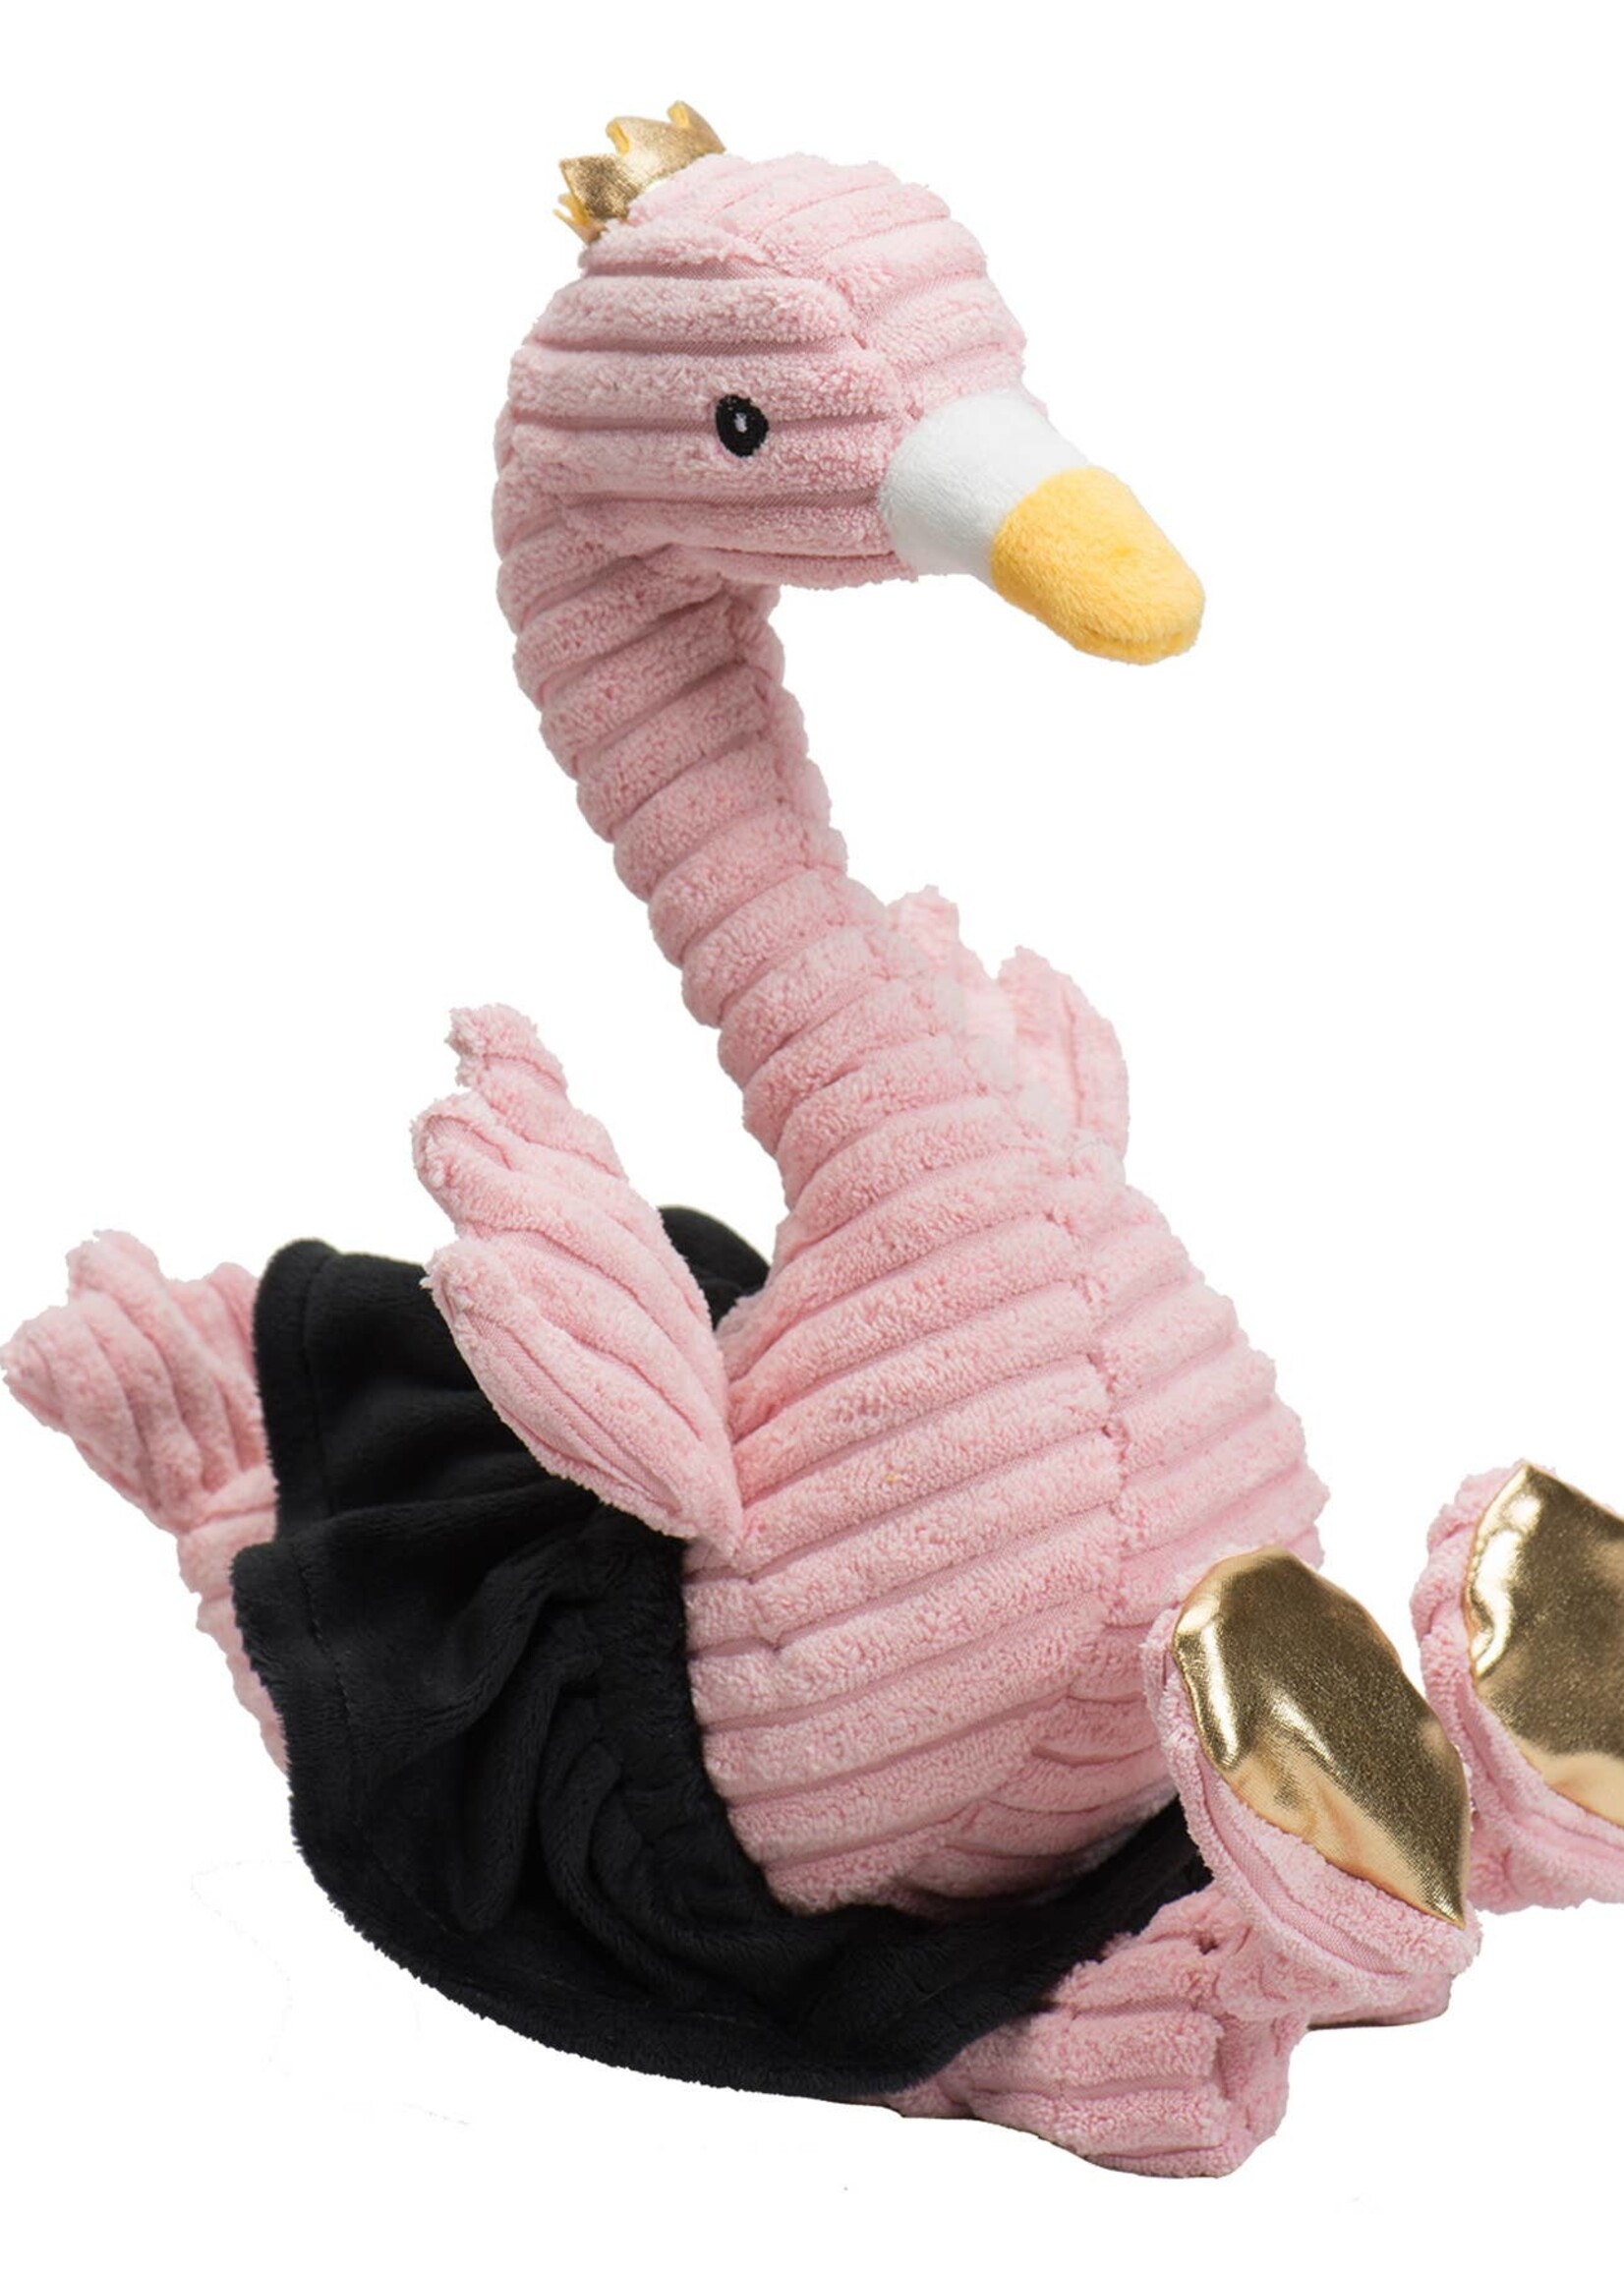 HuggleHounds HuggleHounds Limited Edition Swanky Swan Knottie Precious Pink Plush Dog Toy Large